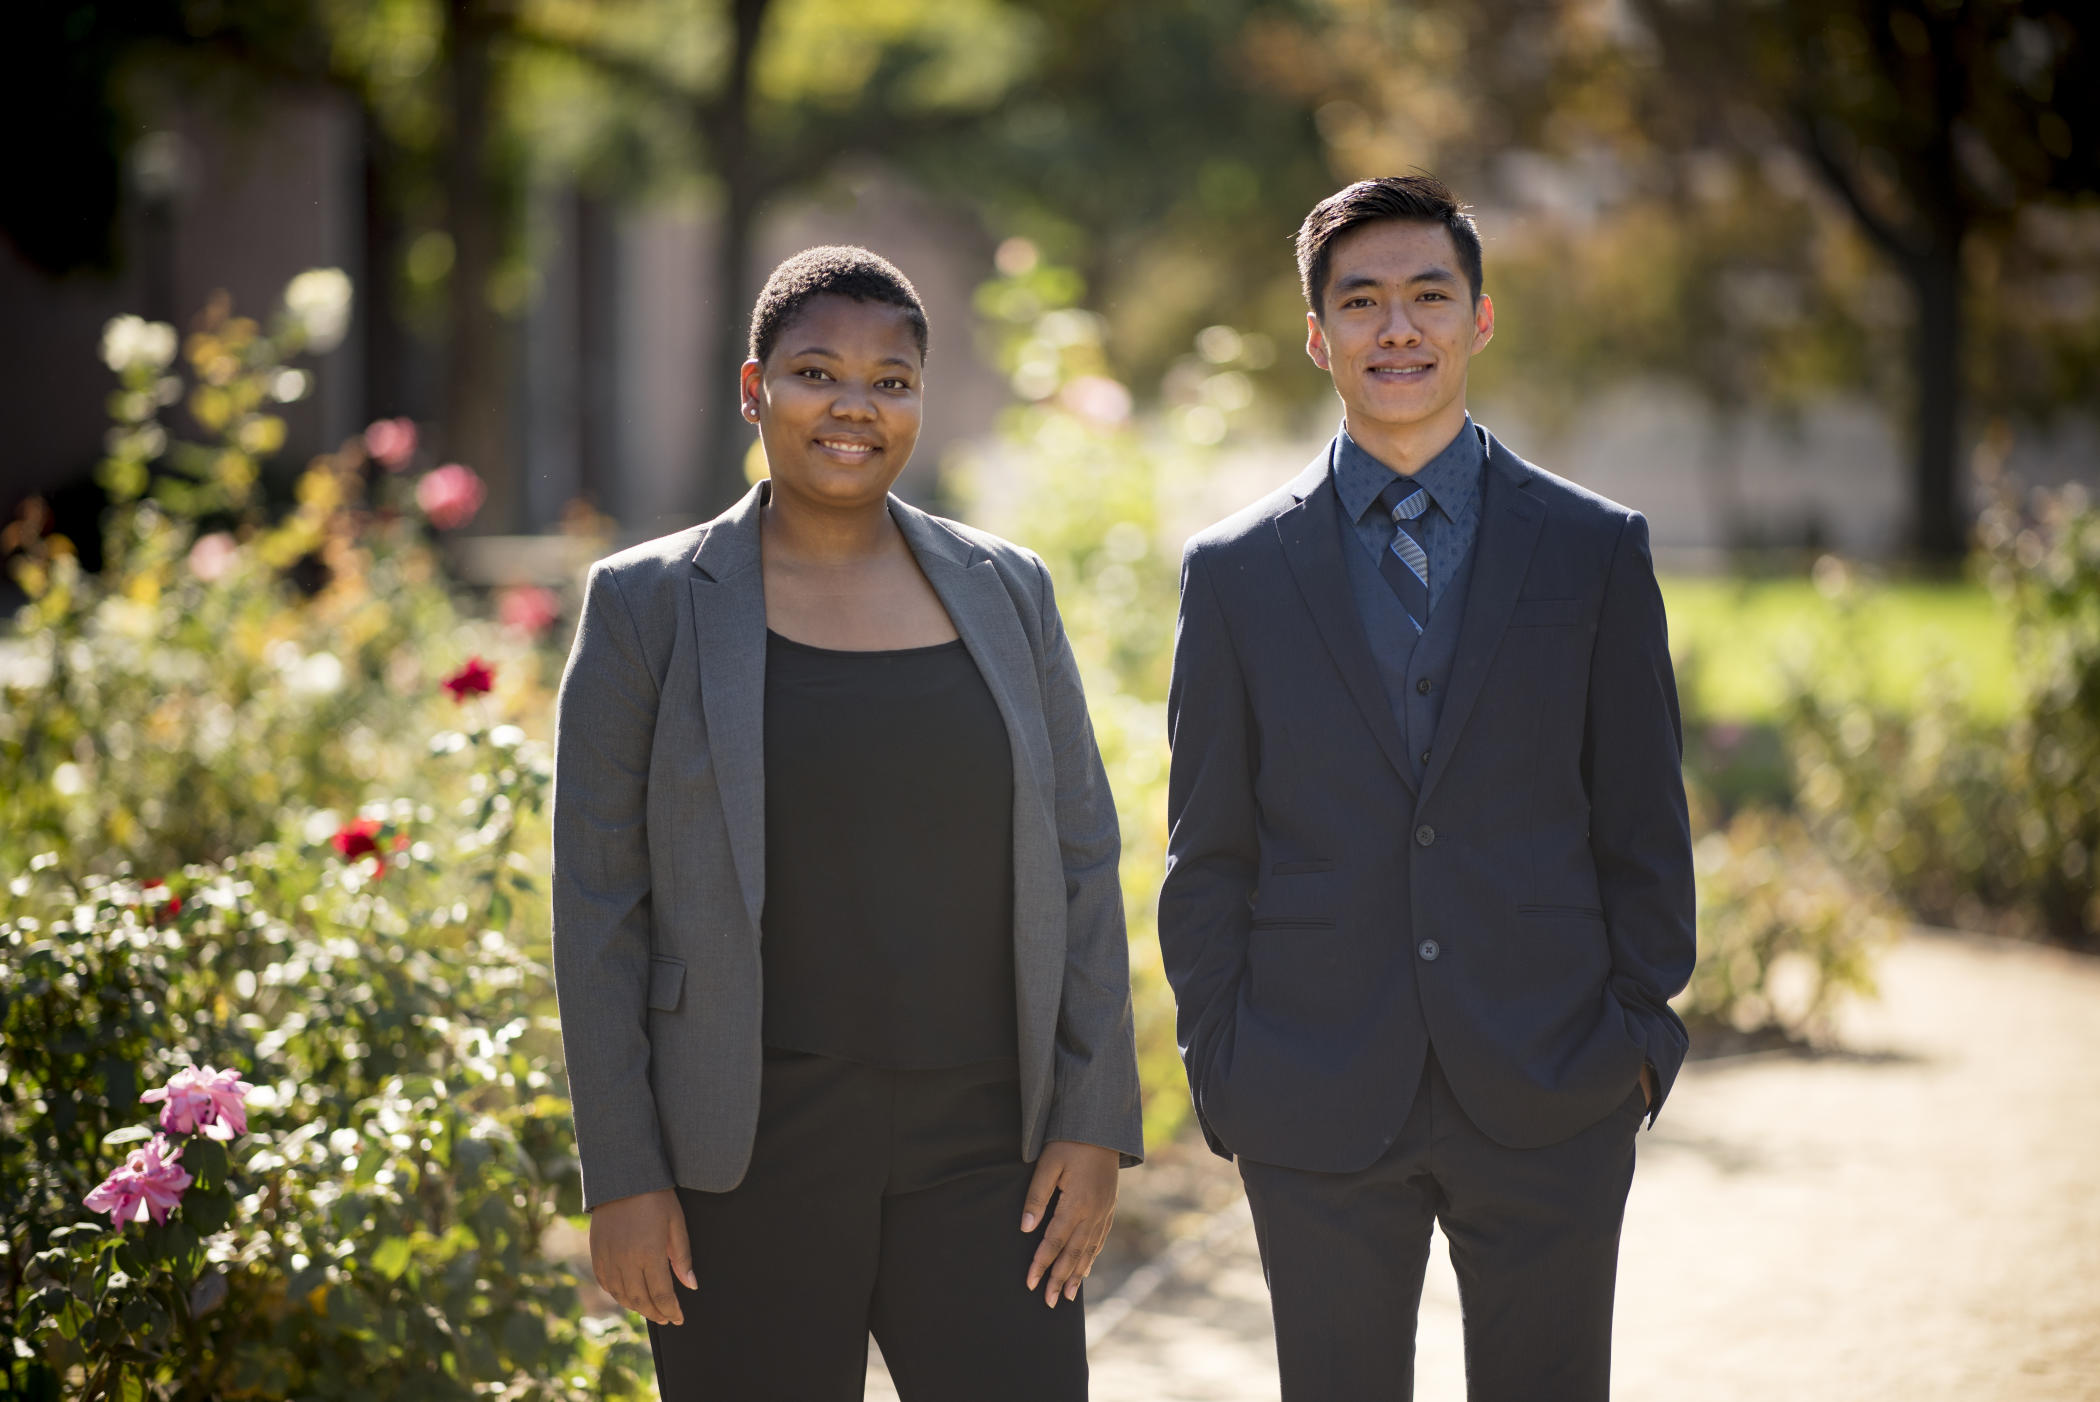 Two students standing in the rose garden, wearing jackets, pants and other professional attire.